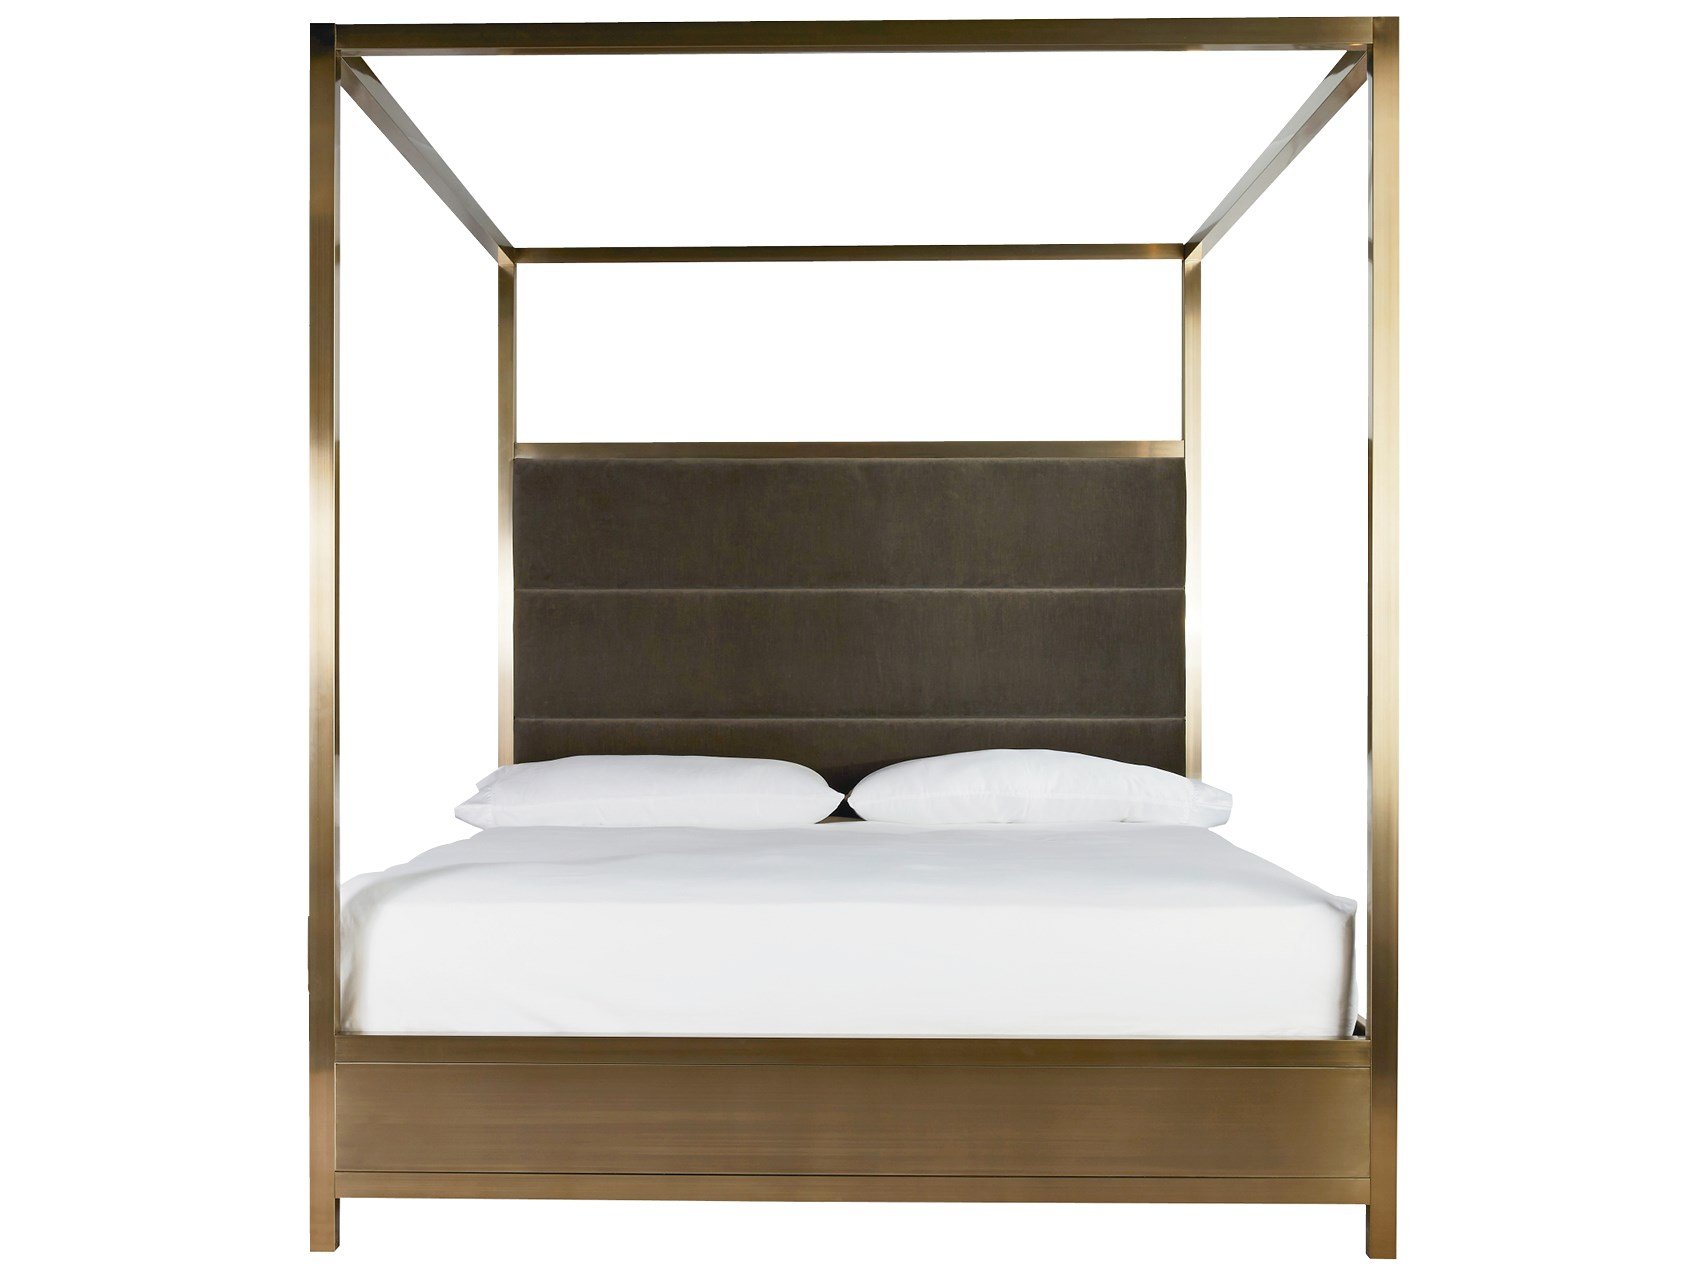 Harlow King Canopy Bed